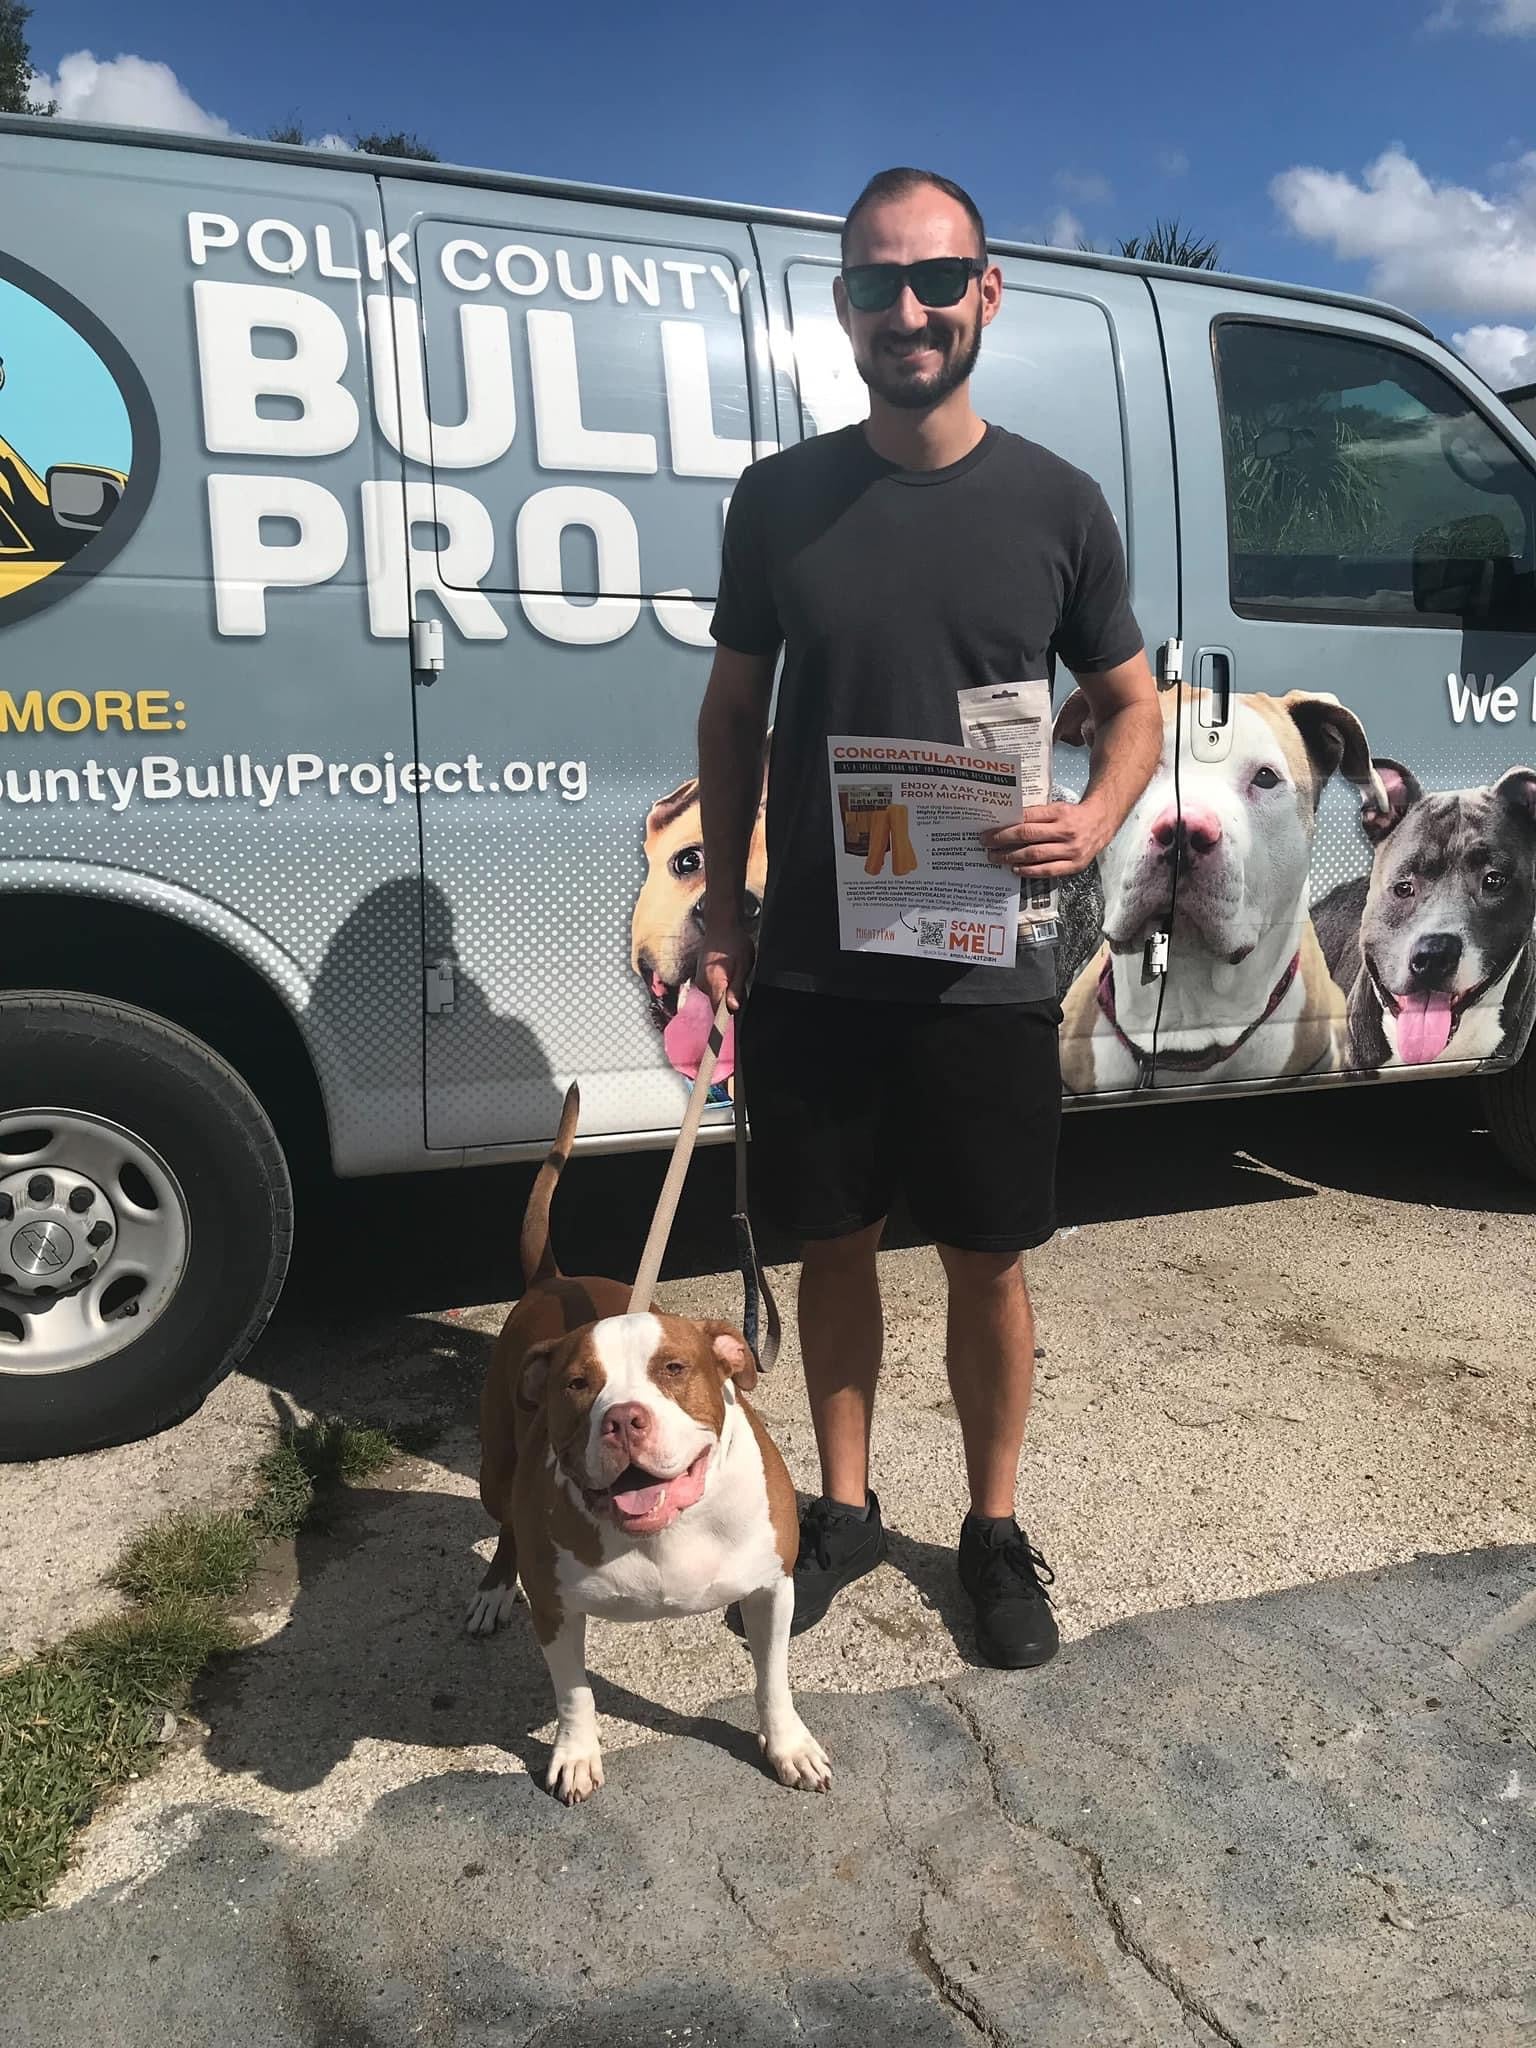 Man and his newly adopted brown and white dog stand in front of Polk County Bully Project van outside.